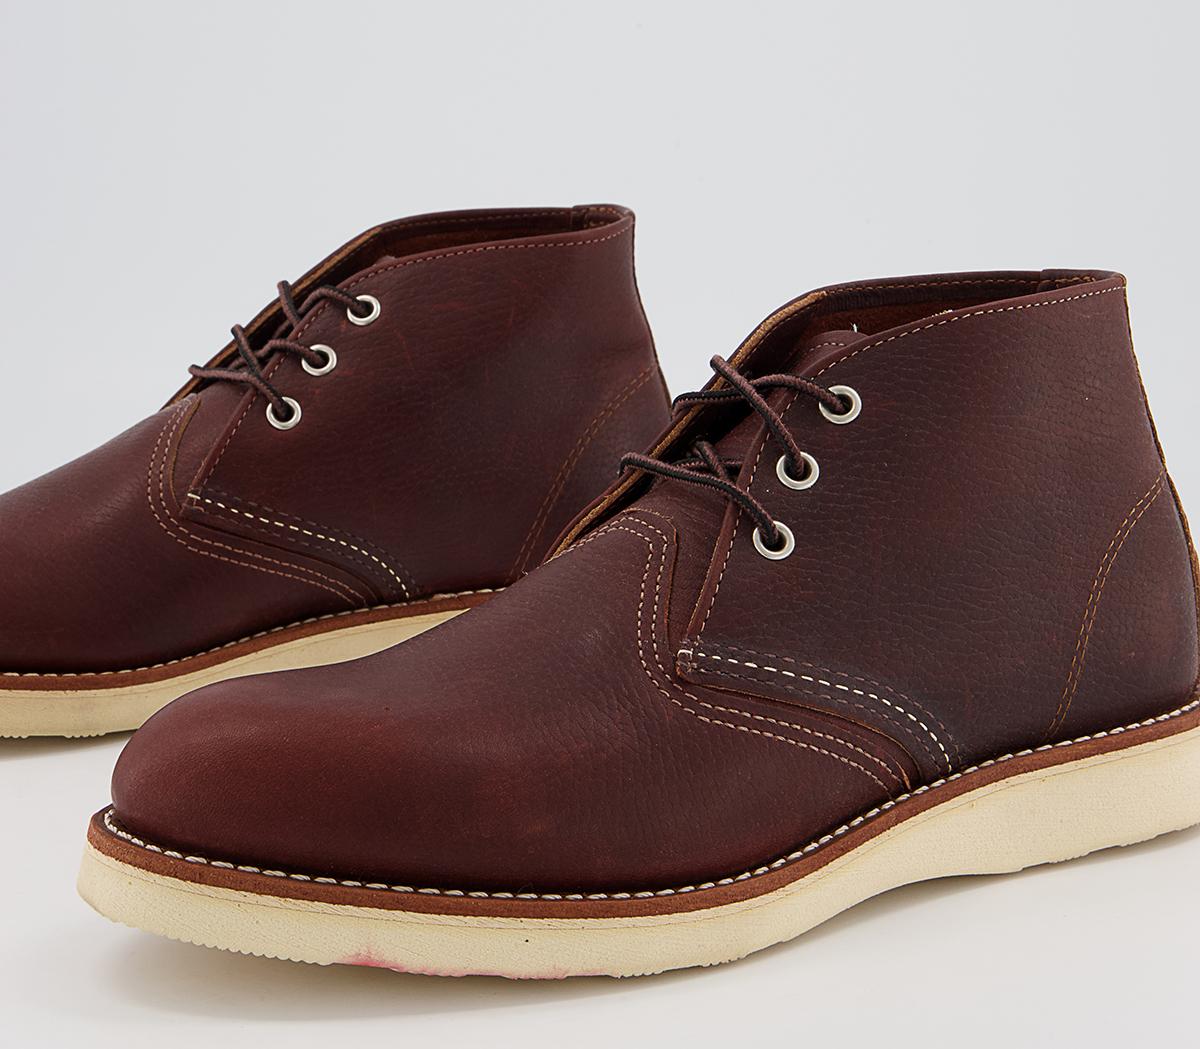 Red Wing Work Chukka Boots Brown Leather - Men’s Boots